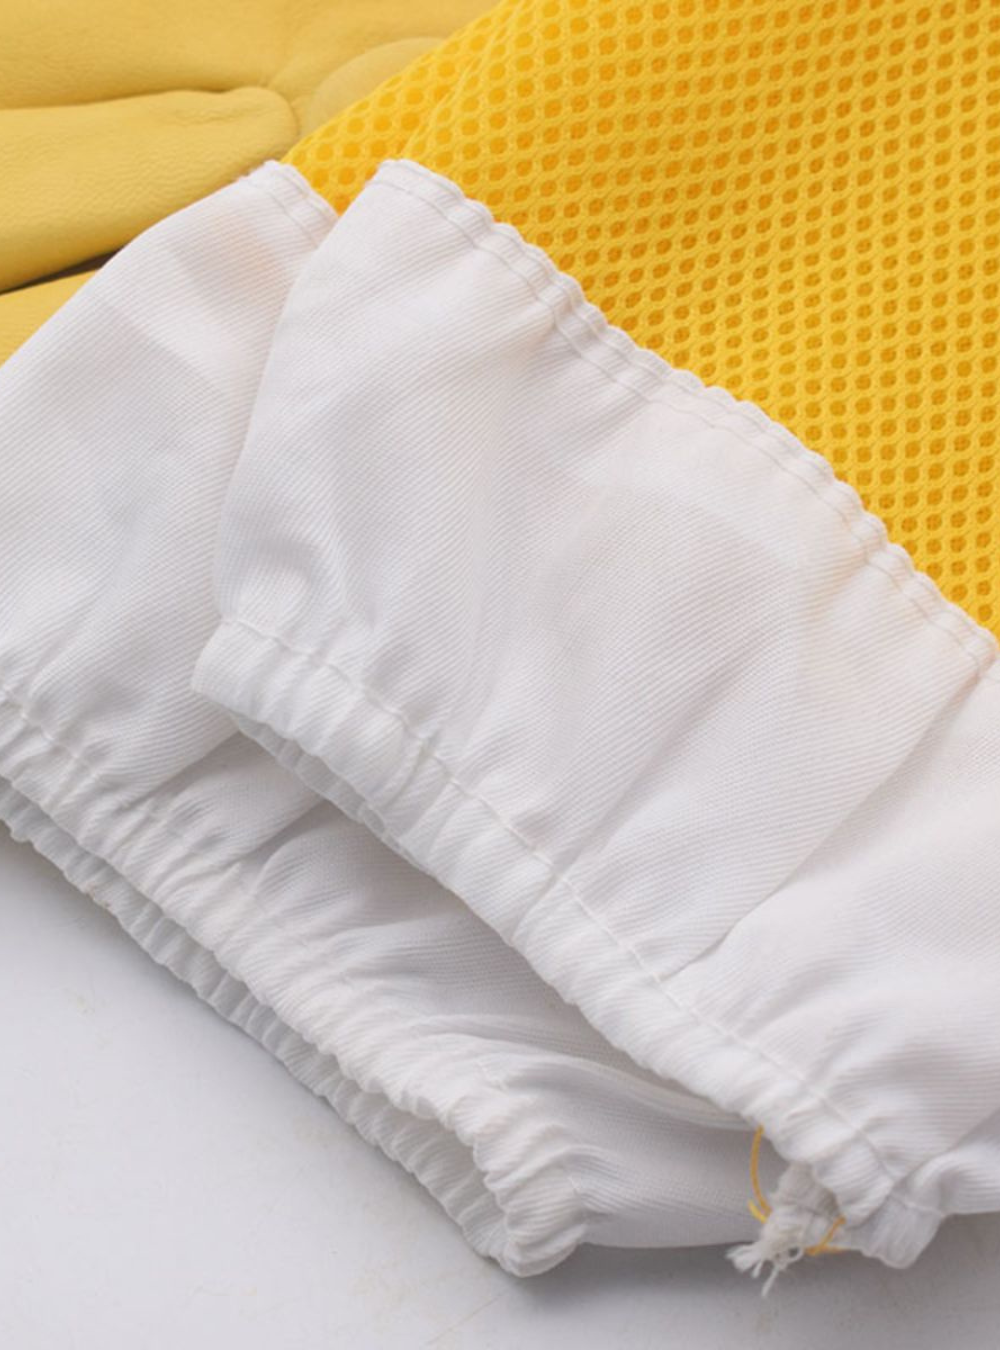 Yellow Beekeeping Protective Gloves with elastic and comfortable stitching.